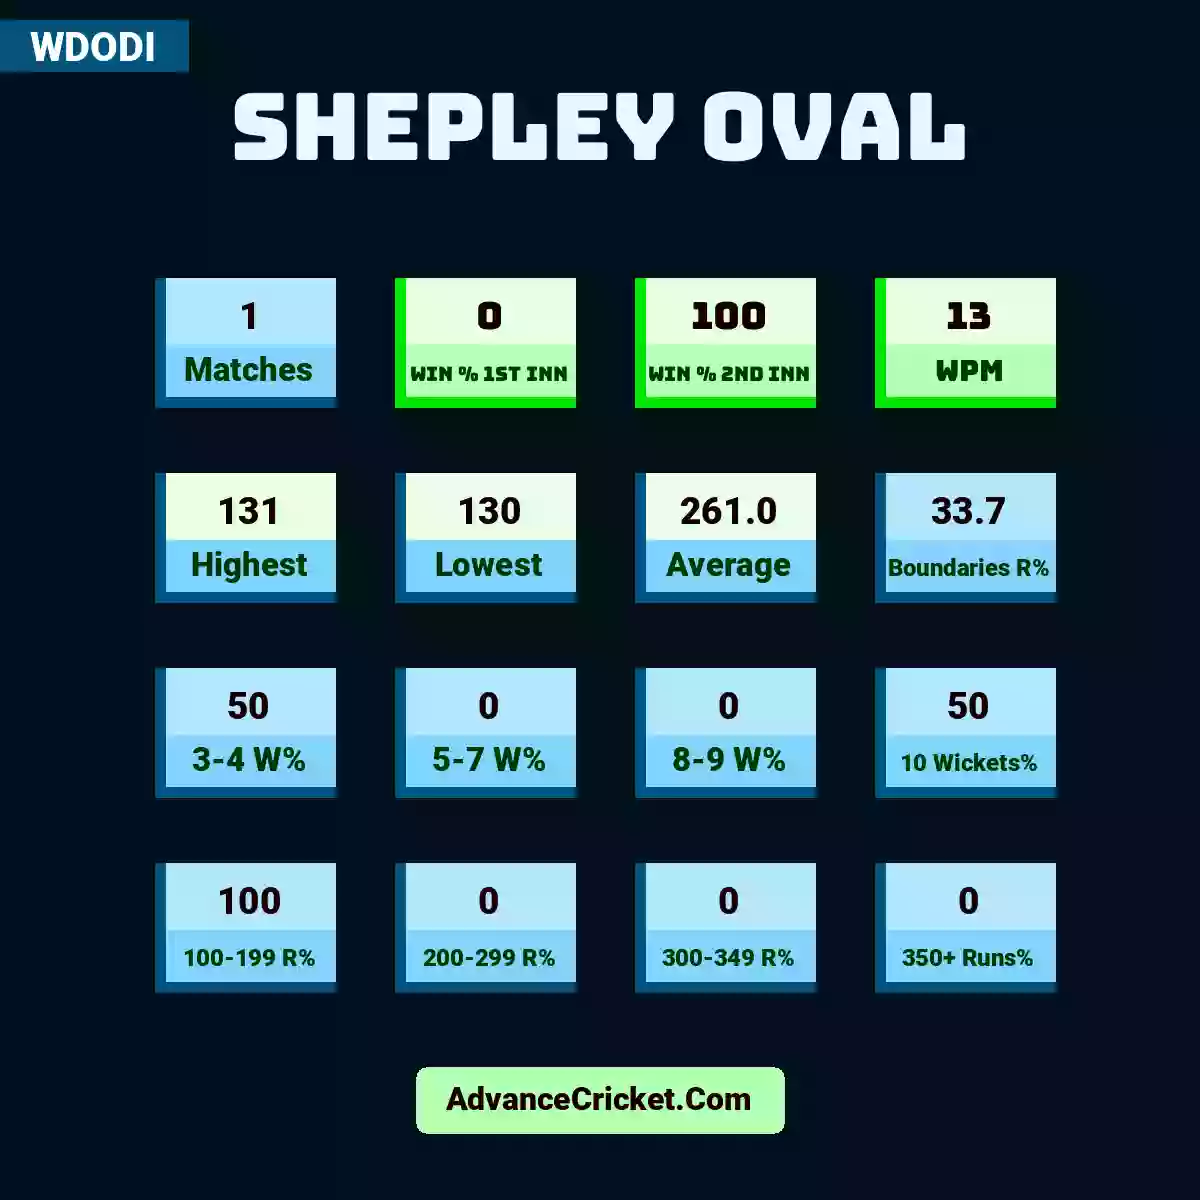 Image showing Shepley Oval with Matches: 1, Win % 1st Inn: 0, Win % 2nd Inn: 100, WPM: 13, Highest: 131, Lowest: 130, Average: 261.0, Boundaries R%: 33.7, 3-4 W%: 50, 5-7 W%: 0, 8-9 W%: 0, 10 Wickets%: 50, 100-199 R%: 100, 200-299 R%: 0, 300-349 R%: 0, 350+ Runs%: 0.